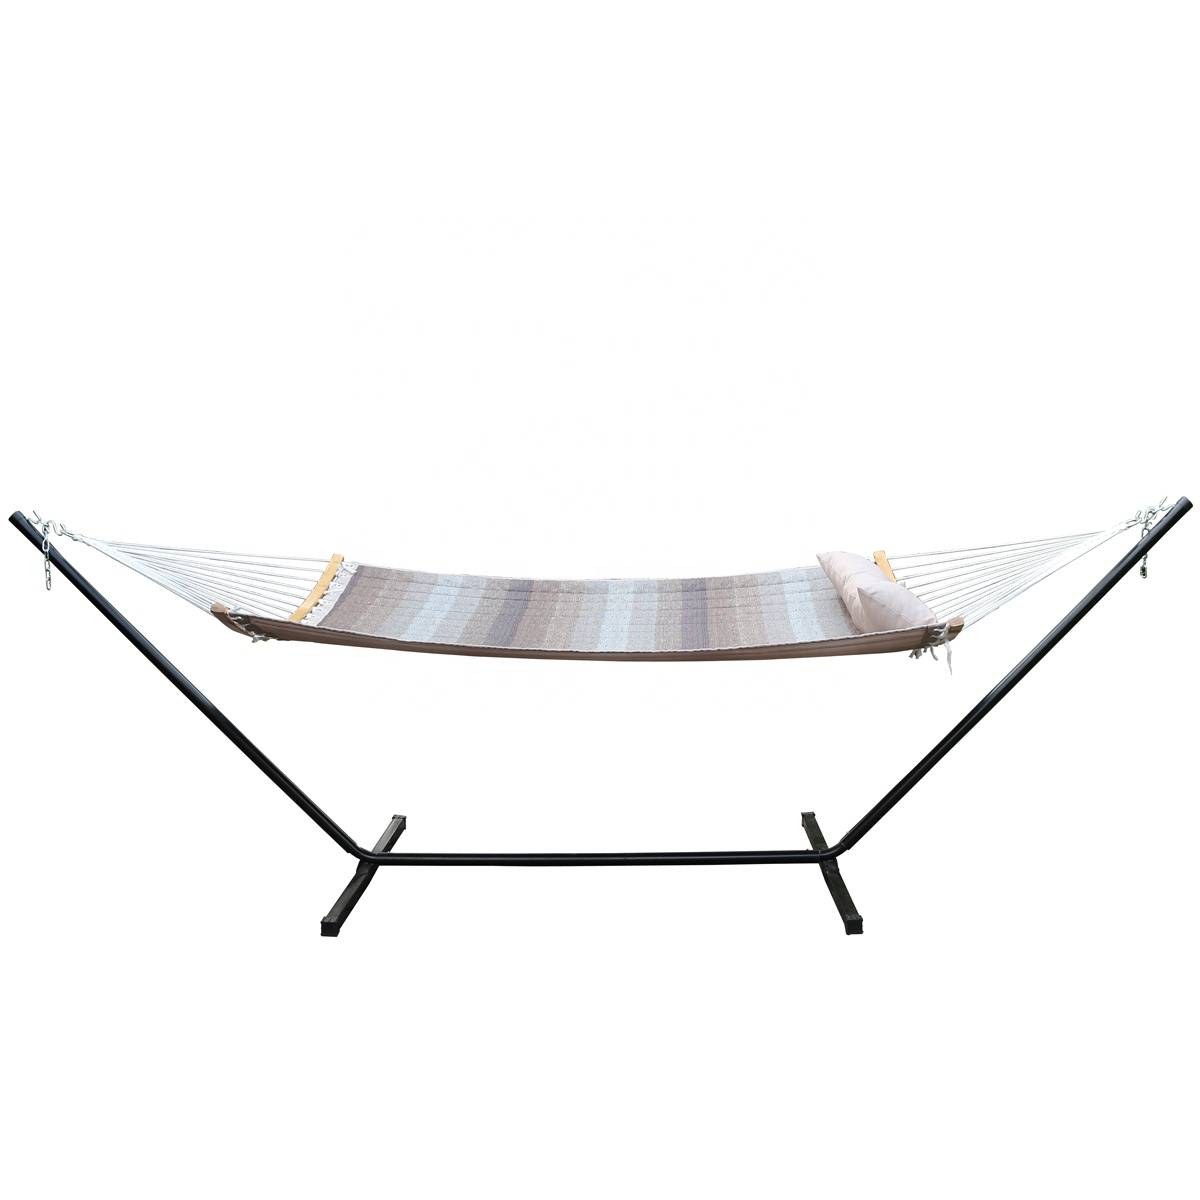 OEM/ODM China Fabric Hanging Chair - Folding Curved  Bar Portable Hammock with Pillow and Carry Bag Hammock Swing Camping Hammocks – Top Asian